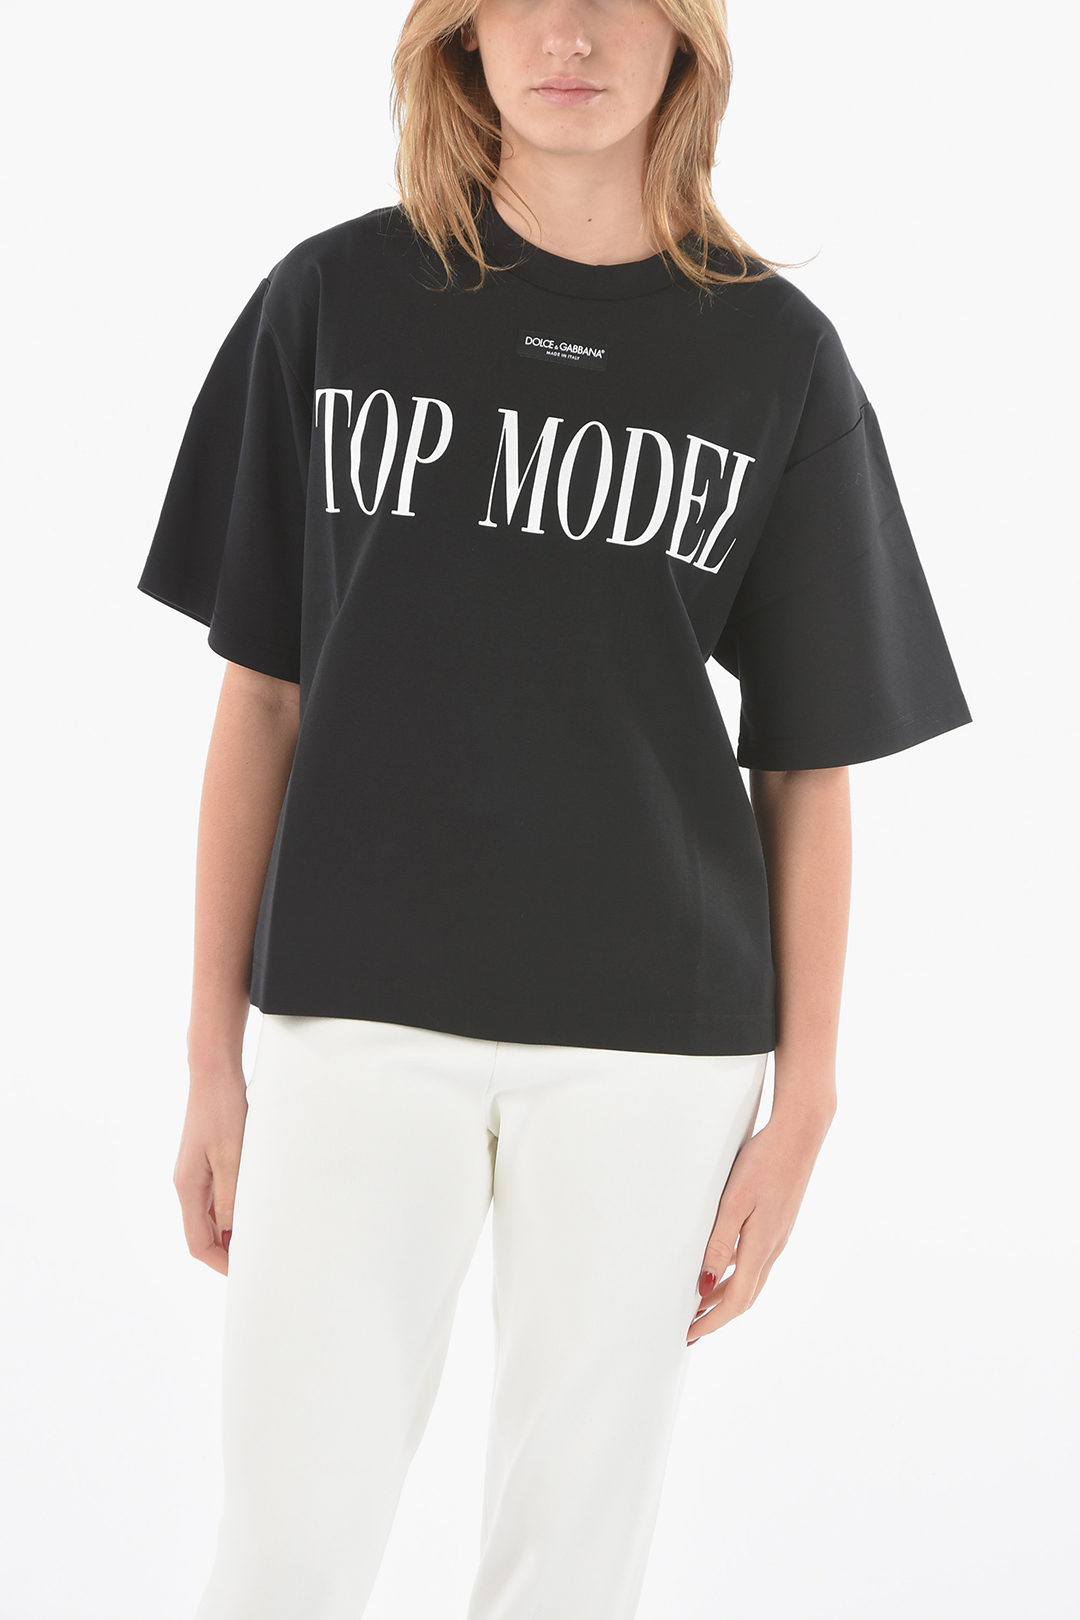 Dolce & Gabbana Crewneck TOP MODEL T-shirt with Lettering Print